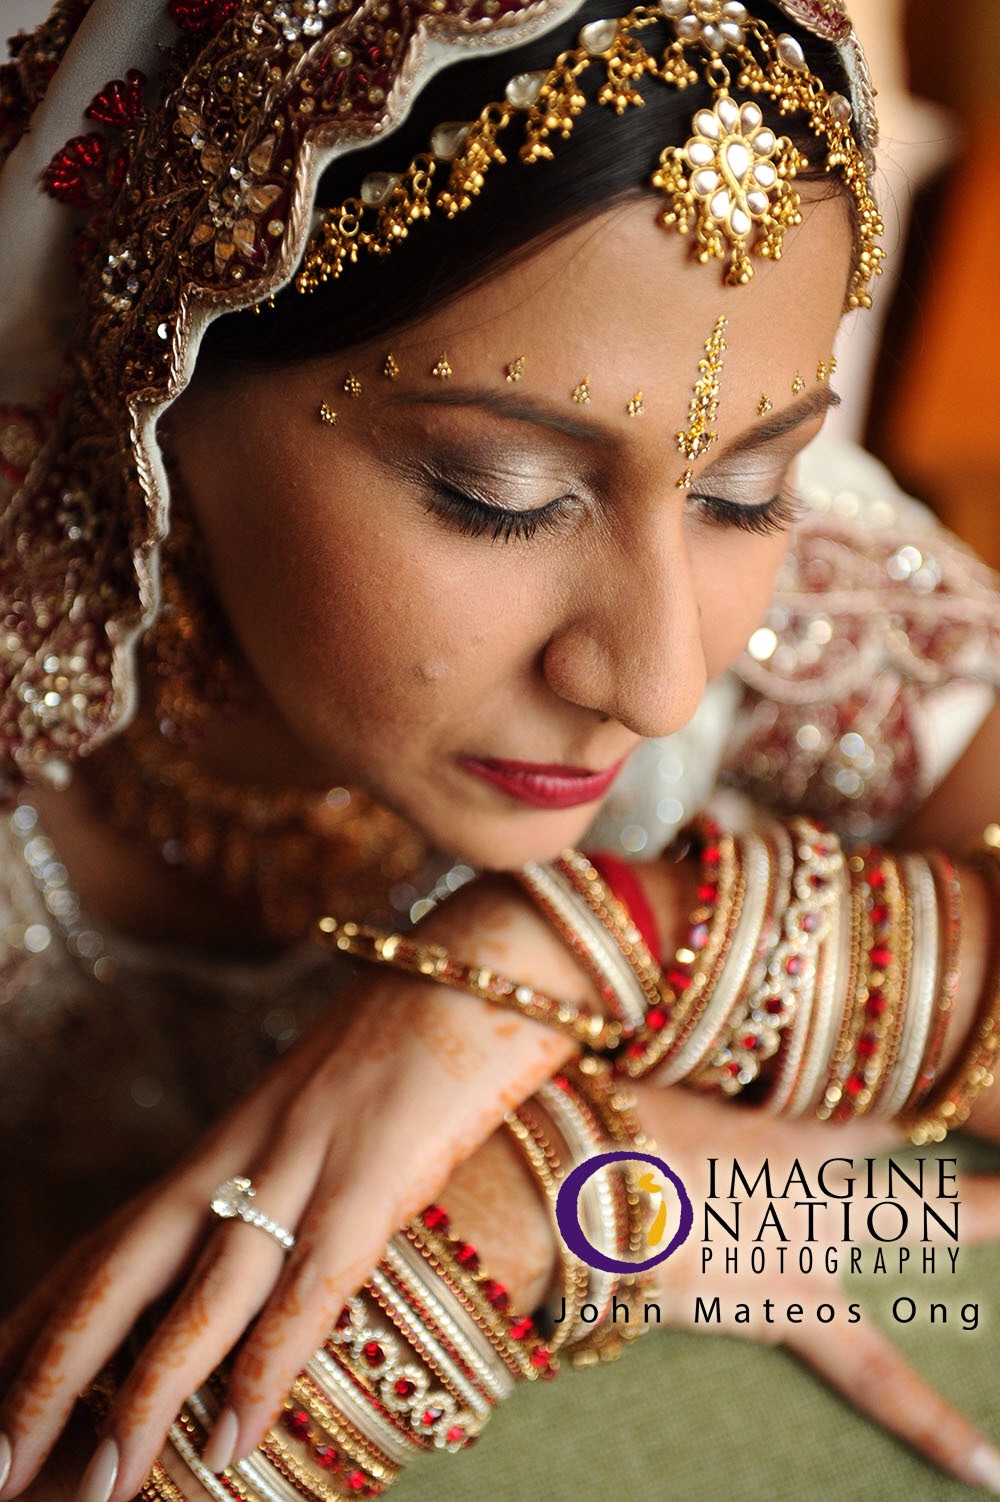 Her gorgeous Indian Bride.